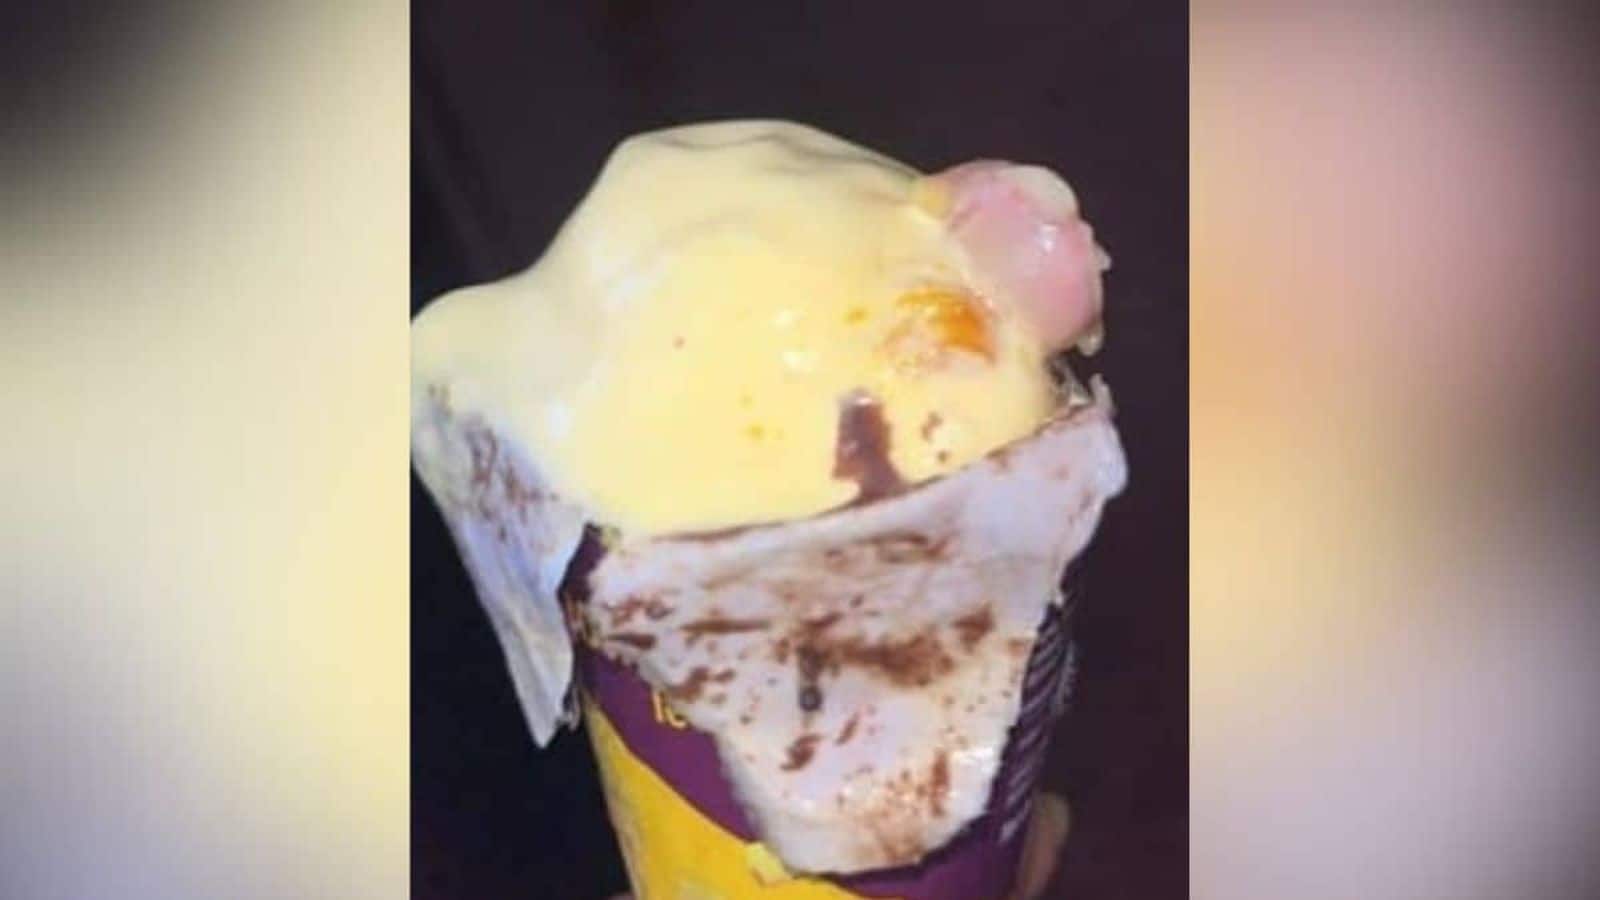 Mumbai resident finds human finger in online-ordered ice cream